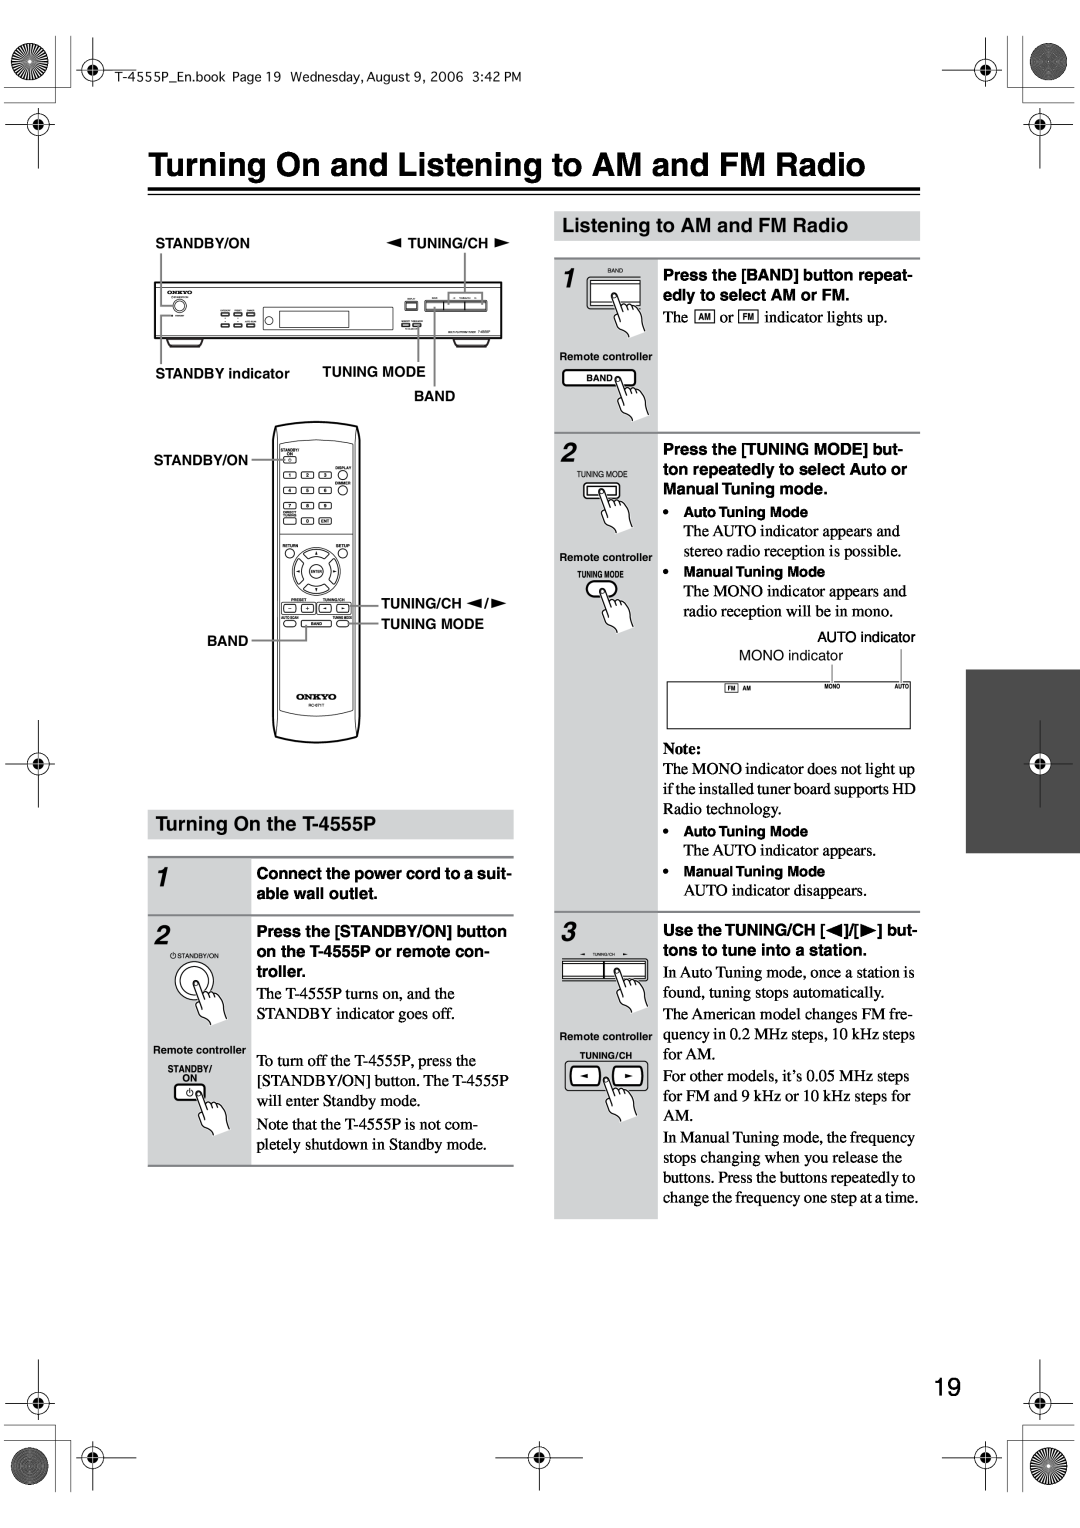 Onkyo instruction manual Turning On and Listening to AM and FM Radio, Turning On the T-4555P 